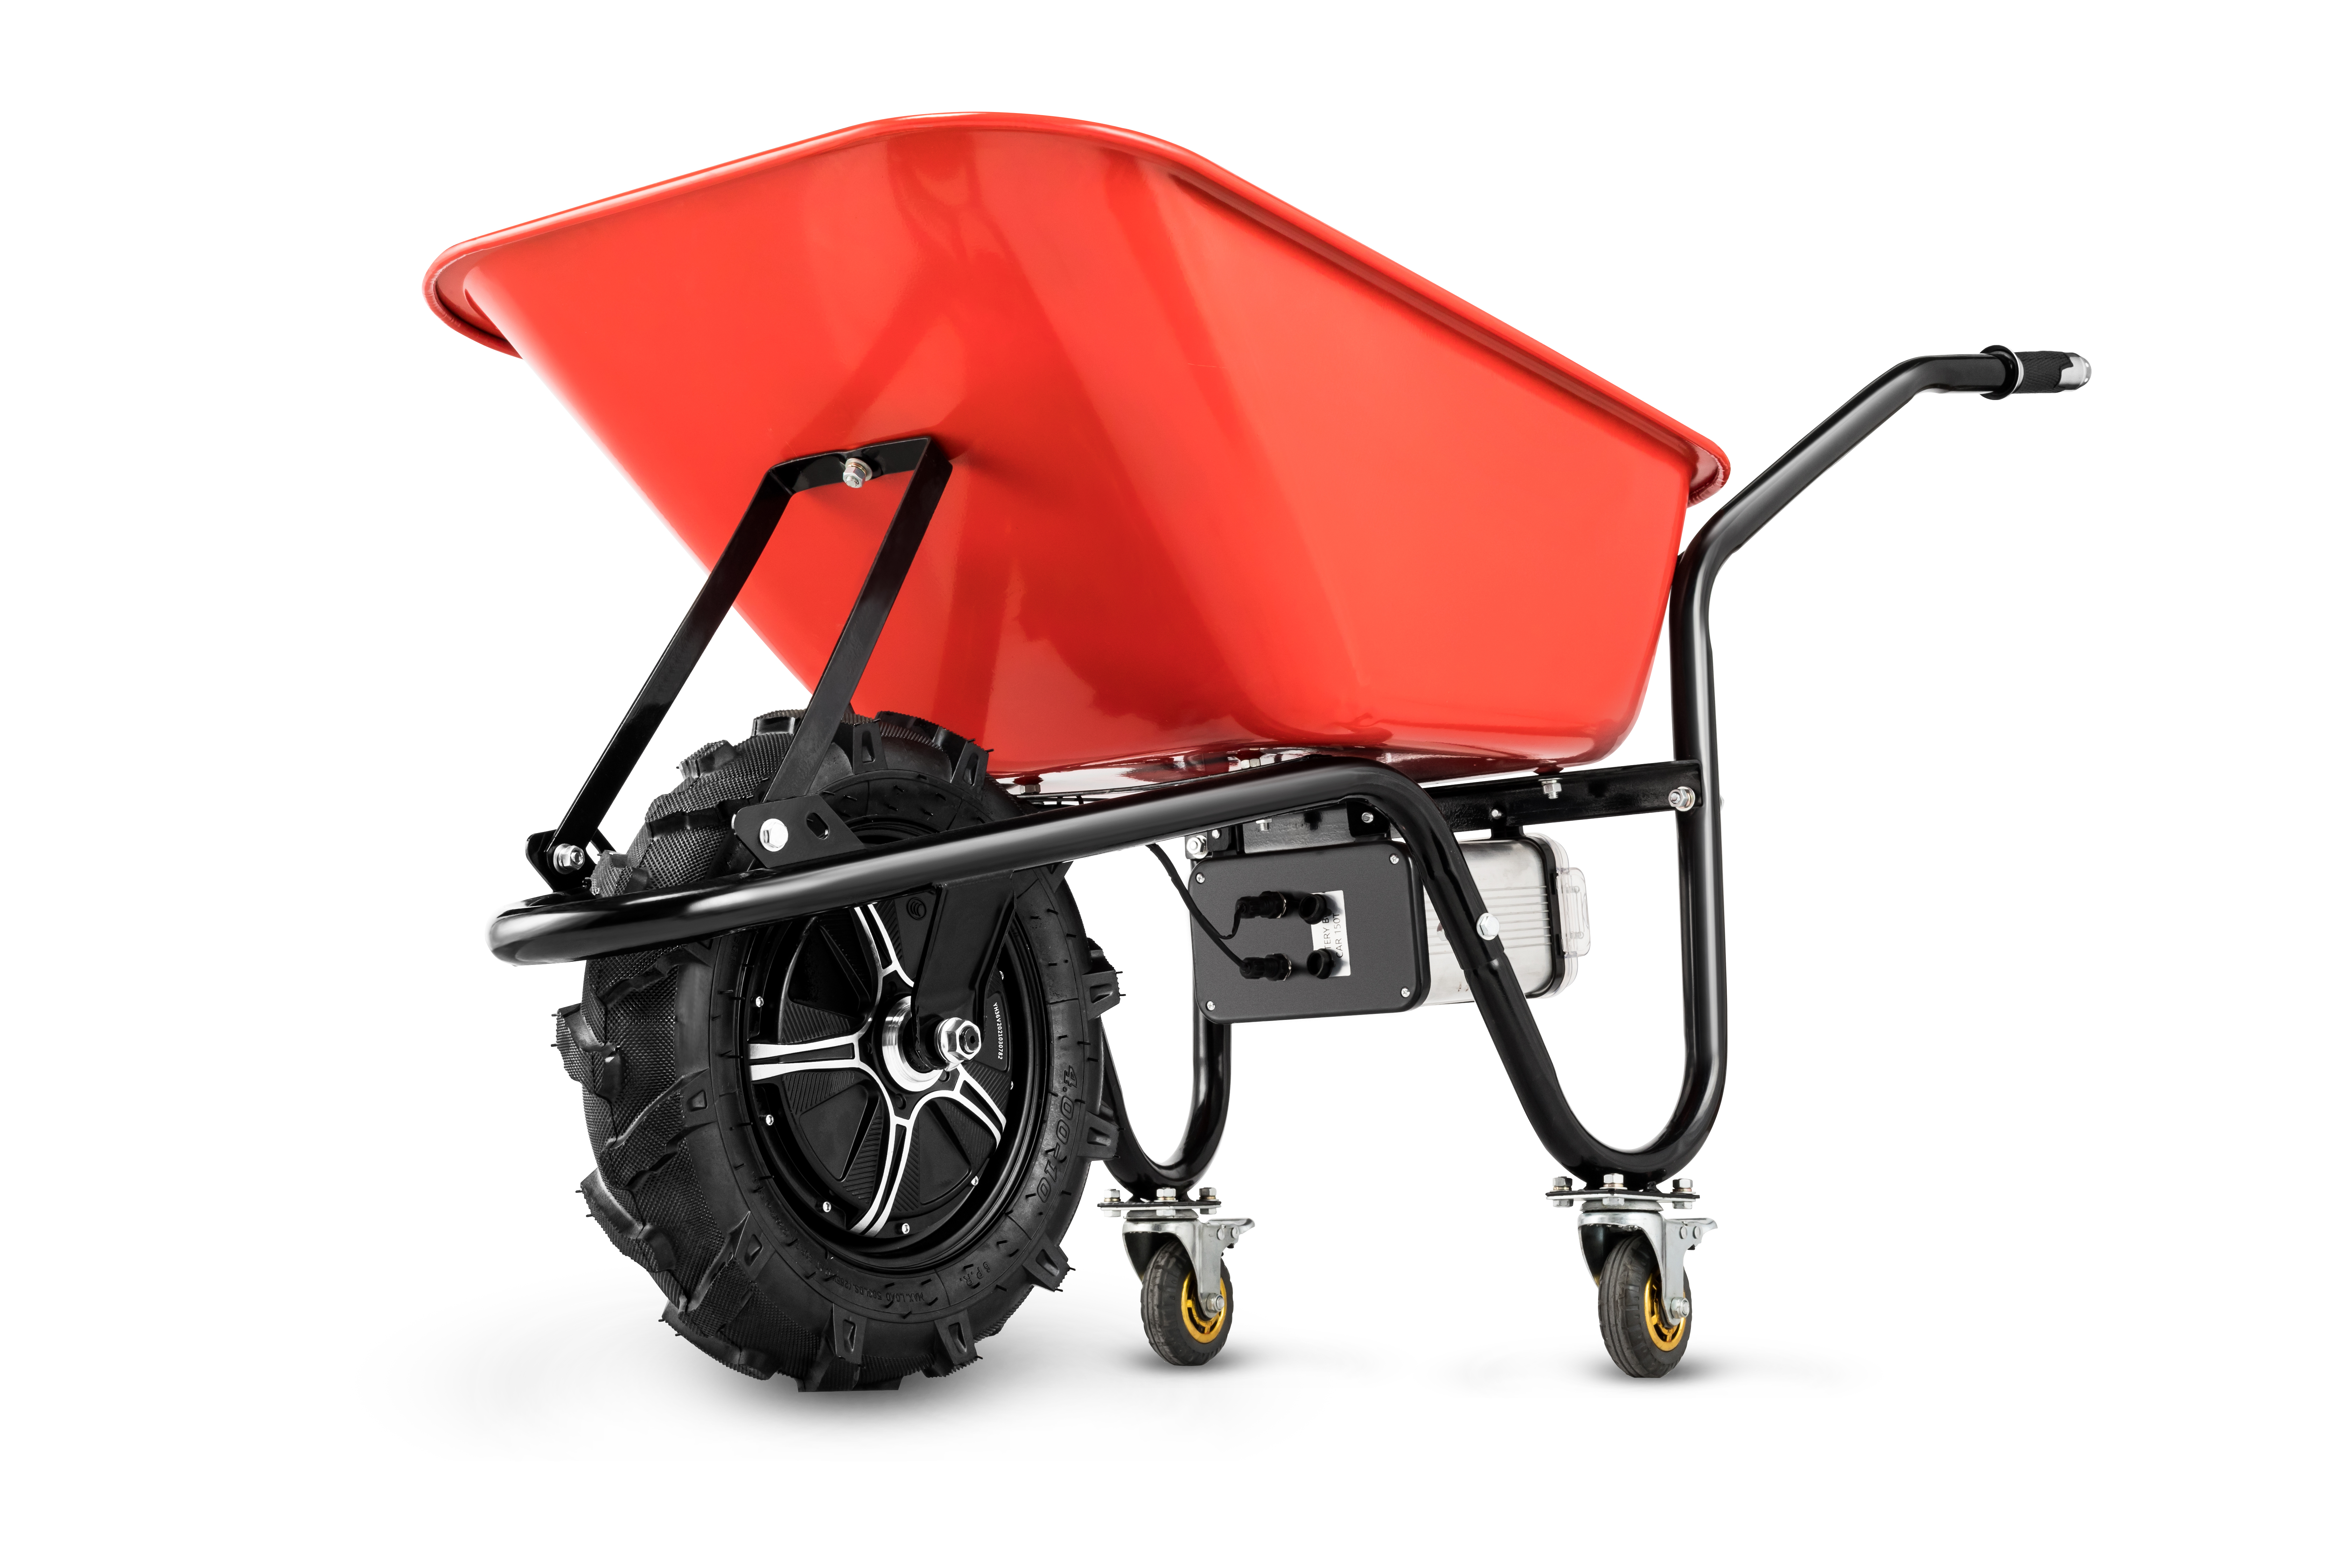 China Wholesale Polyphase Motors Factory –  EWB150G, electric wheelbarrow ,with lithium battery, with 280w gear motor , Max load 200kgs,5.00-8 tyre – Qina